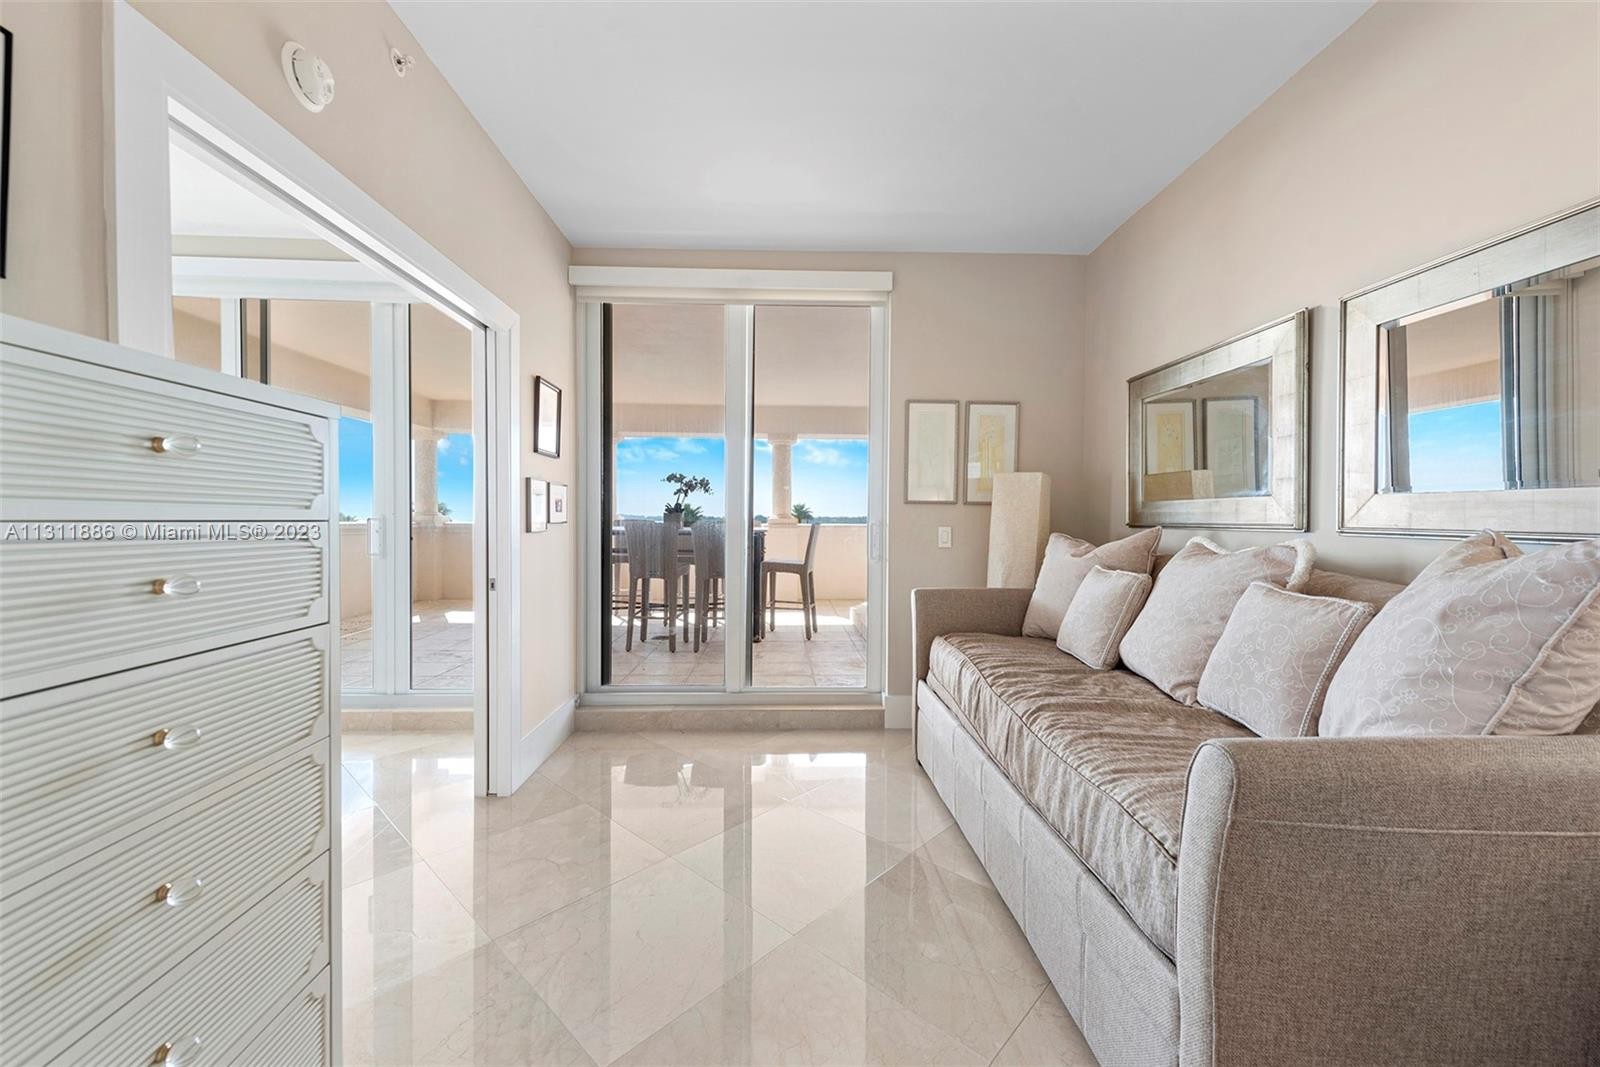 23. 19253 Fisher Island Dr